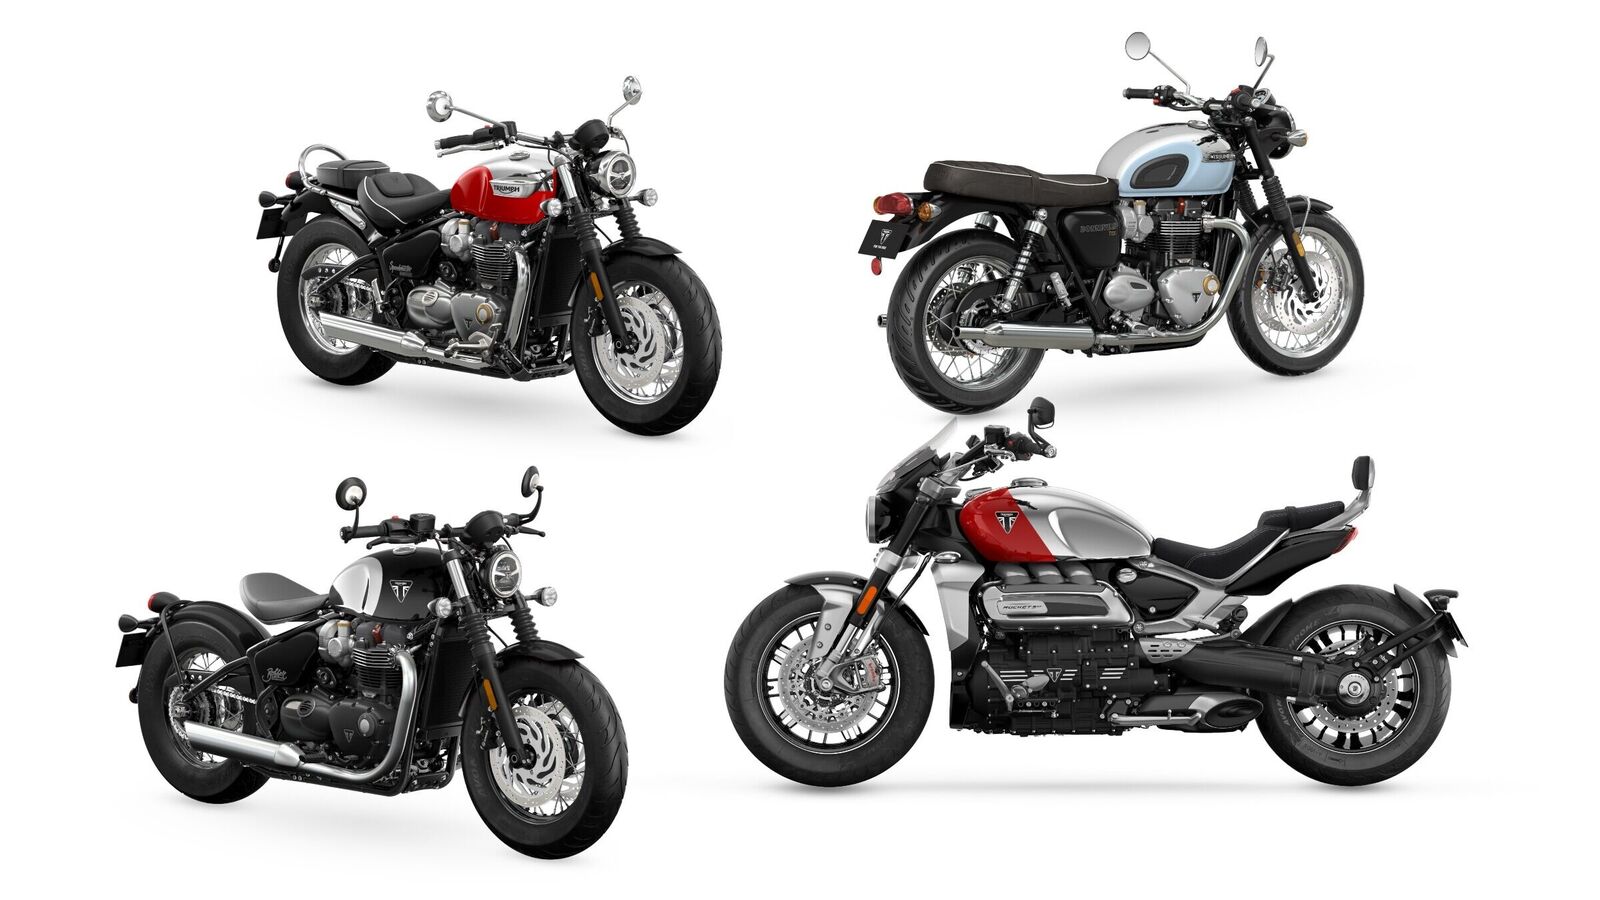 Triumph Rocket 3 R launched, price starts at Rs 18 lakh